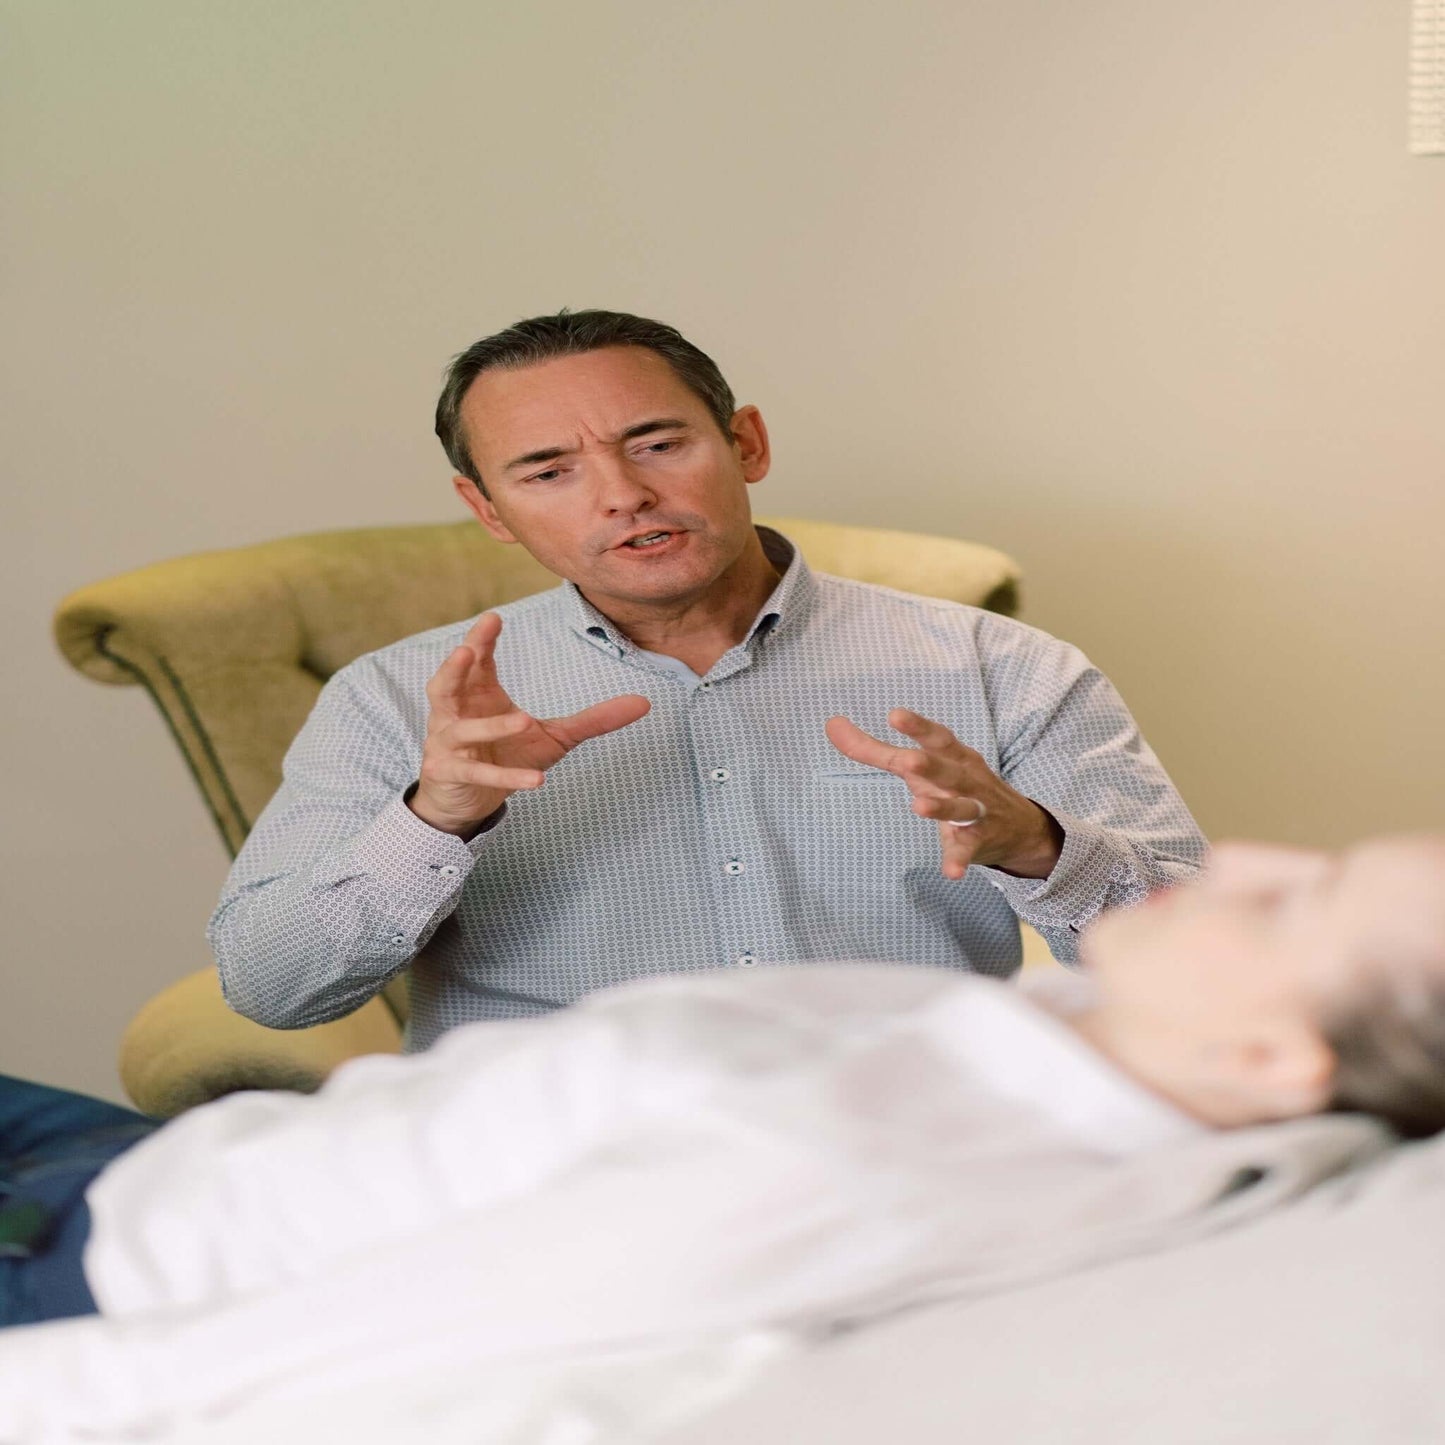 The image of a man speaking to a person lying down in a therapy session, implying the services of an IBS therapist register member